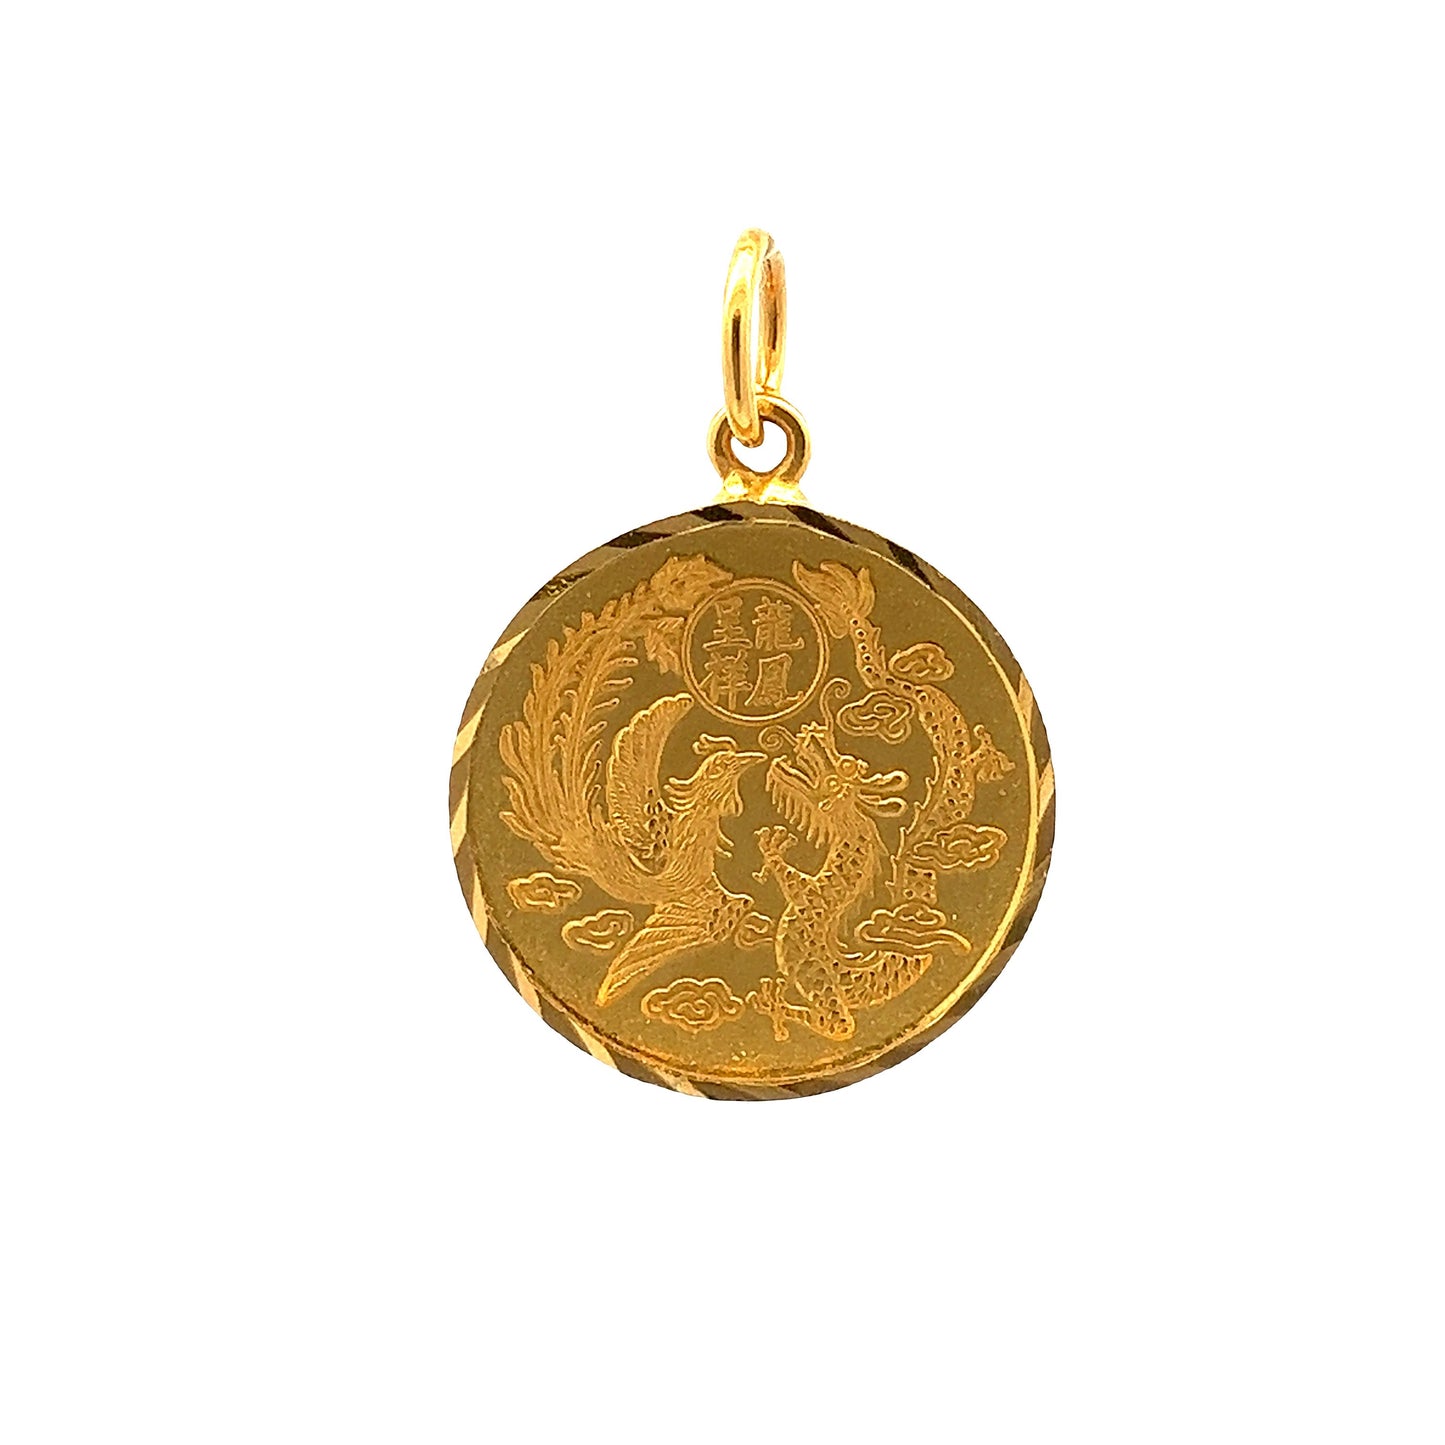 GOLD PENDANT ( 22K ) ( 5.13g ) - P002967 Chain sold separately